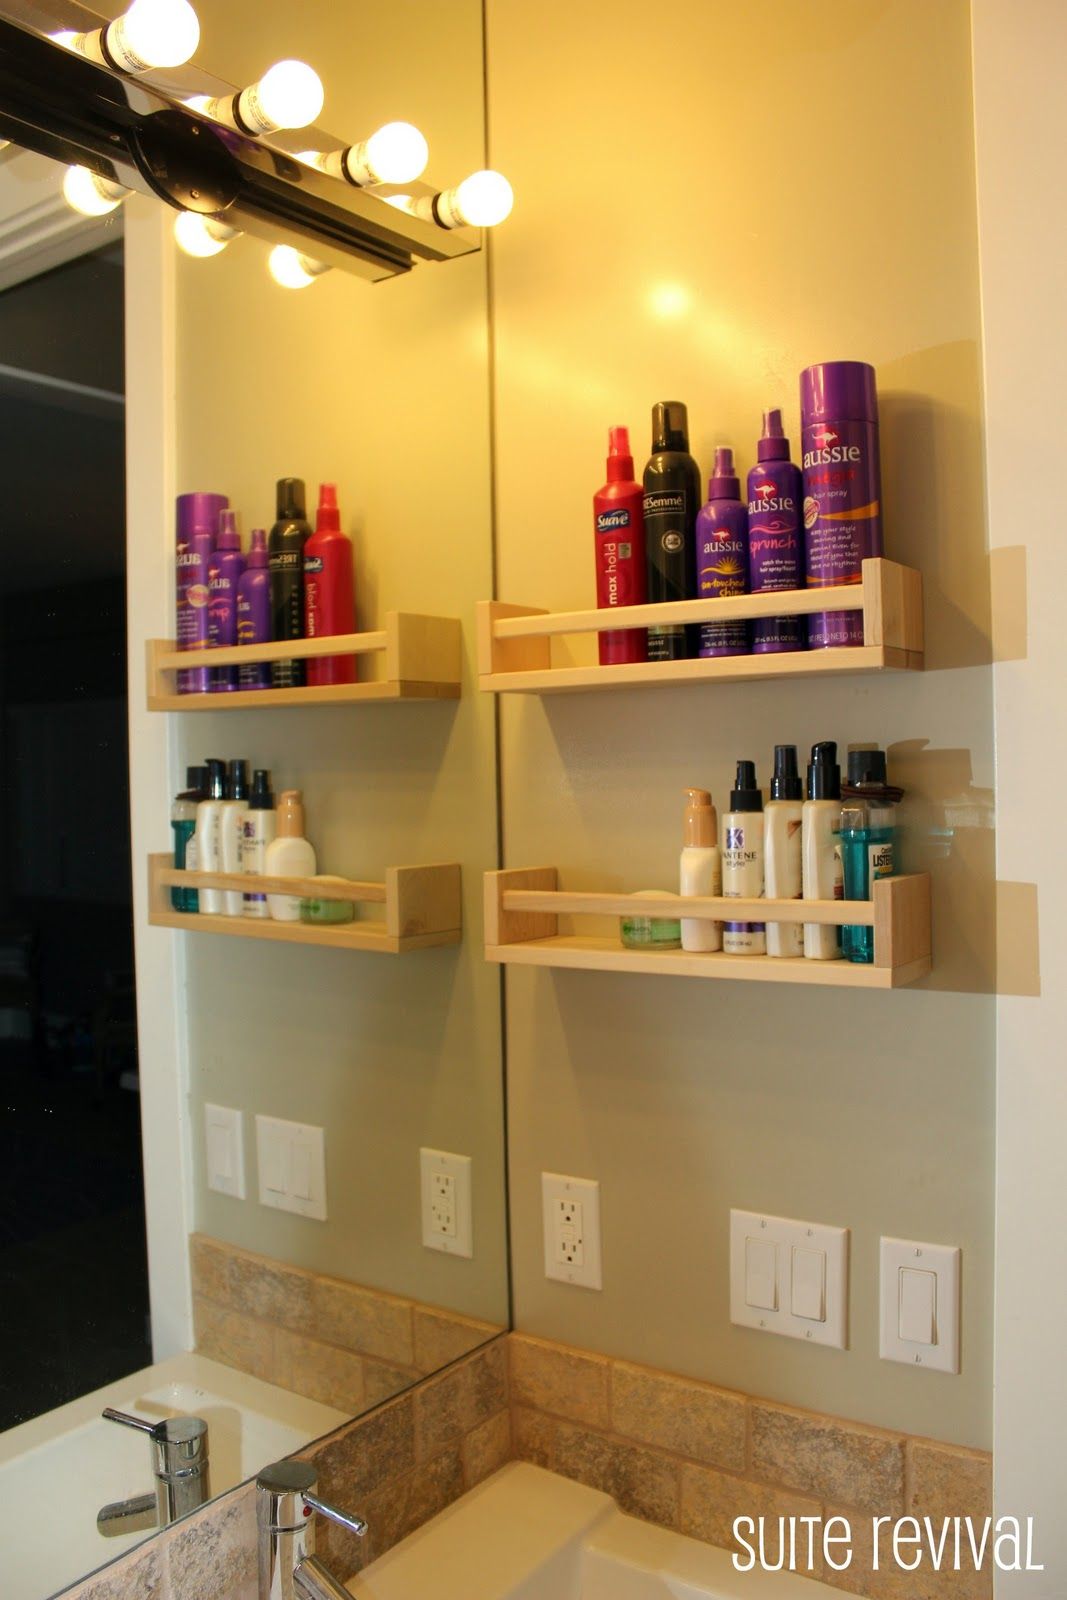 use spice racks as shelves in the bathroom better organize and get stuff off the